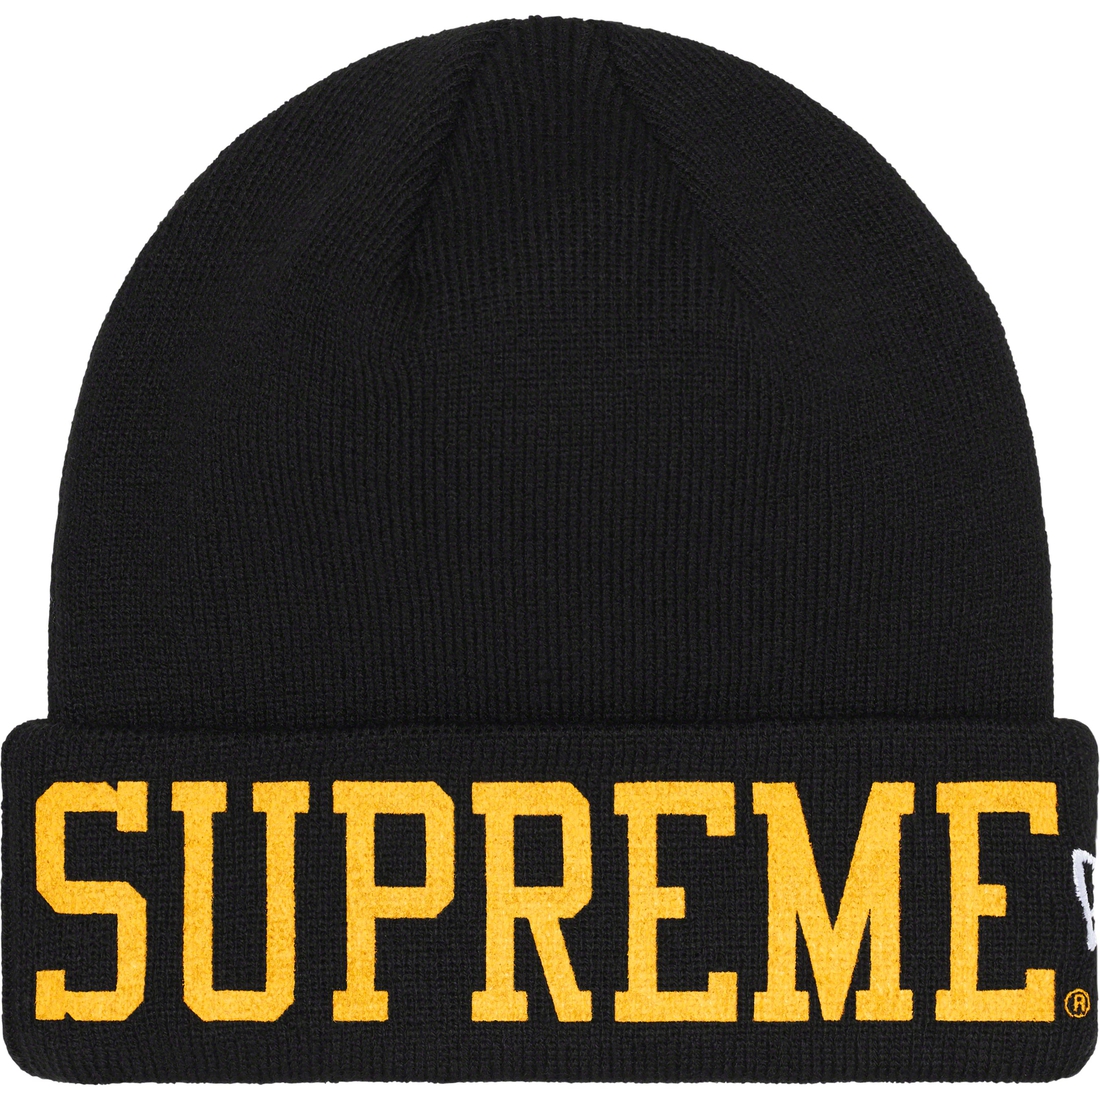 Details on New Era Varsity Beanie Black from fall winter
                                                    2023 (Price is $40)